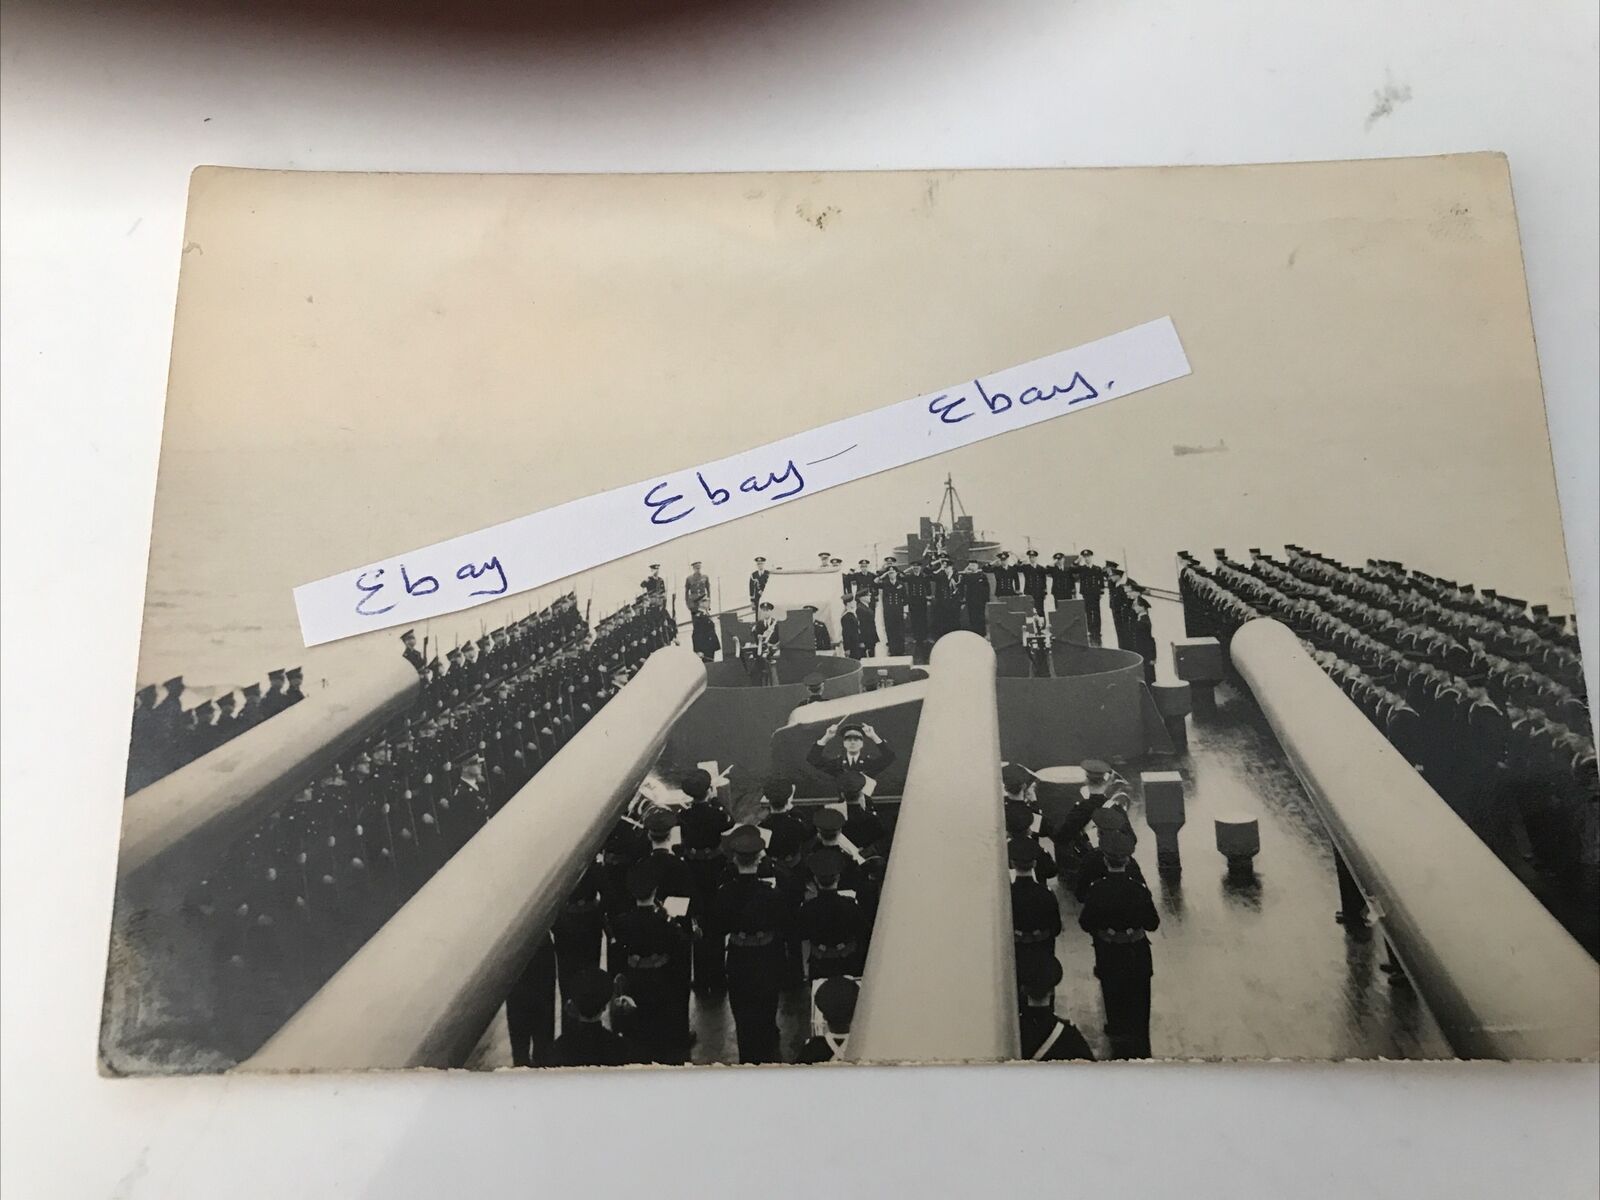 WW2 HMS Duke of York Photo Foredeck Crew Assembled and Band Playing RN Off Photo